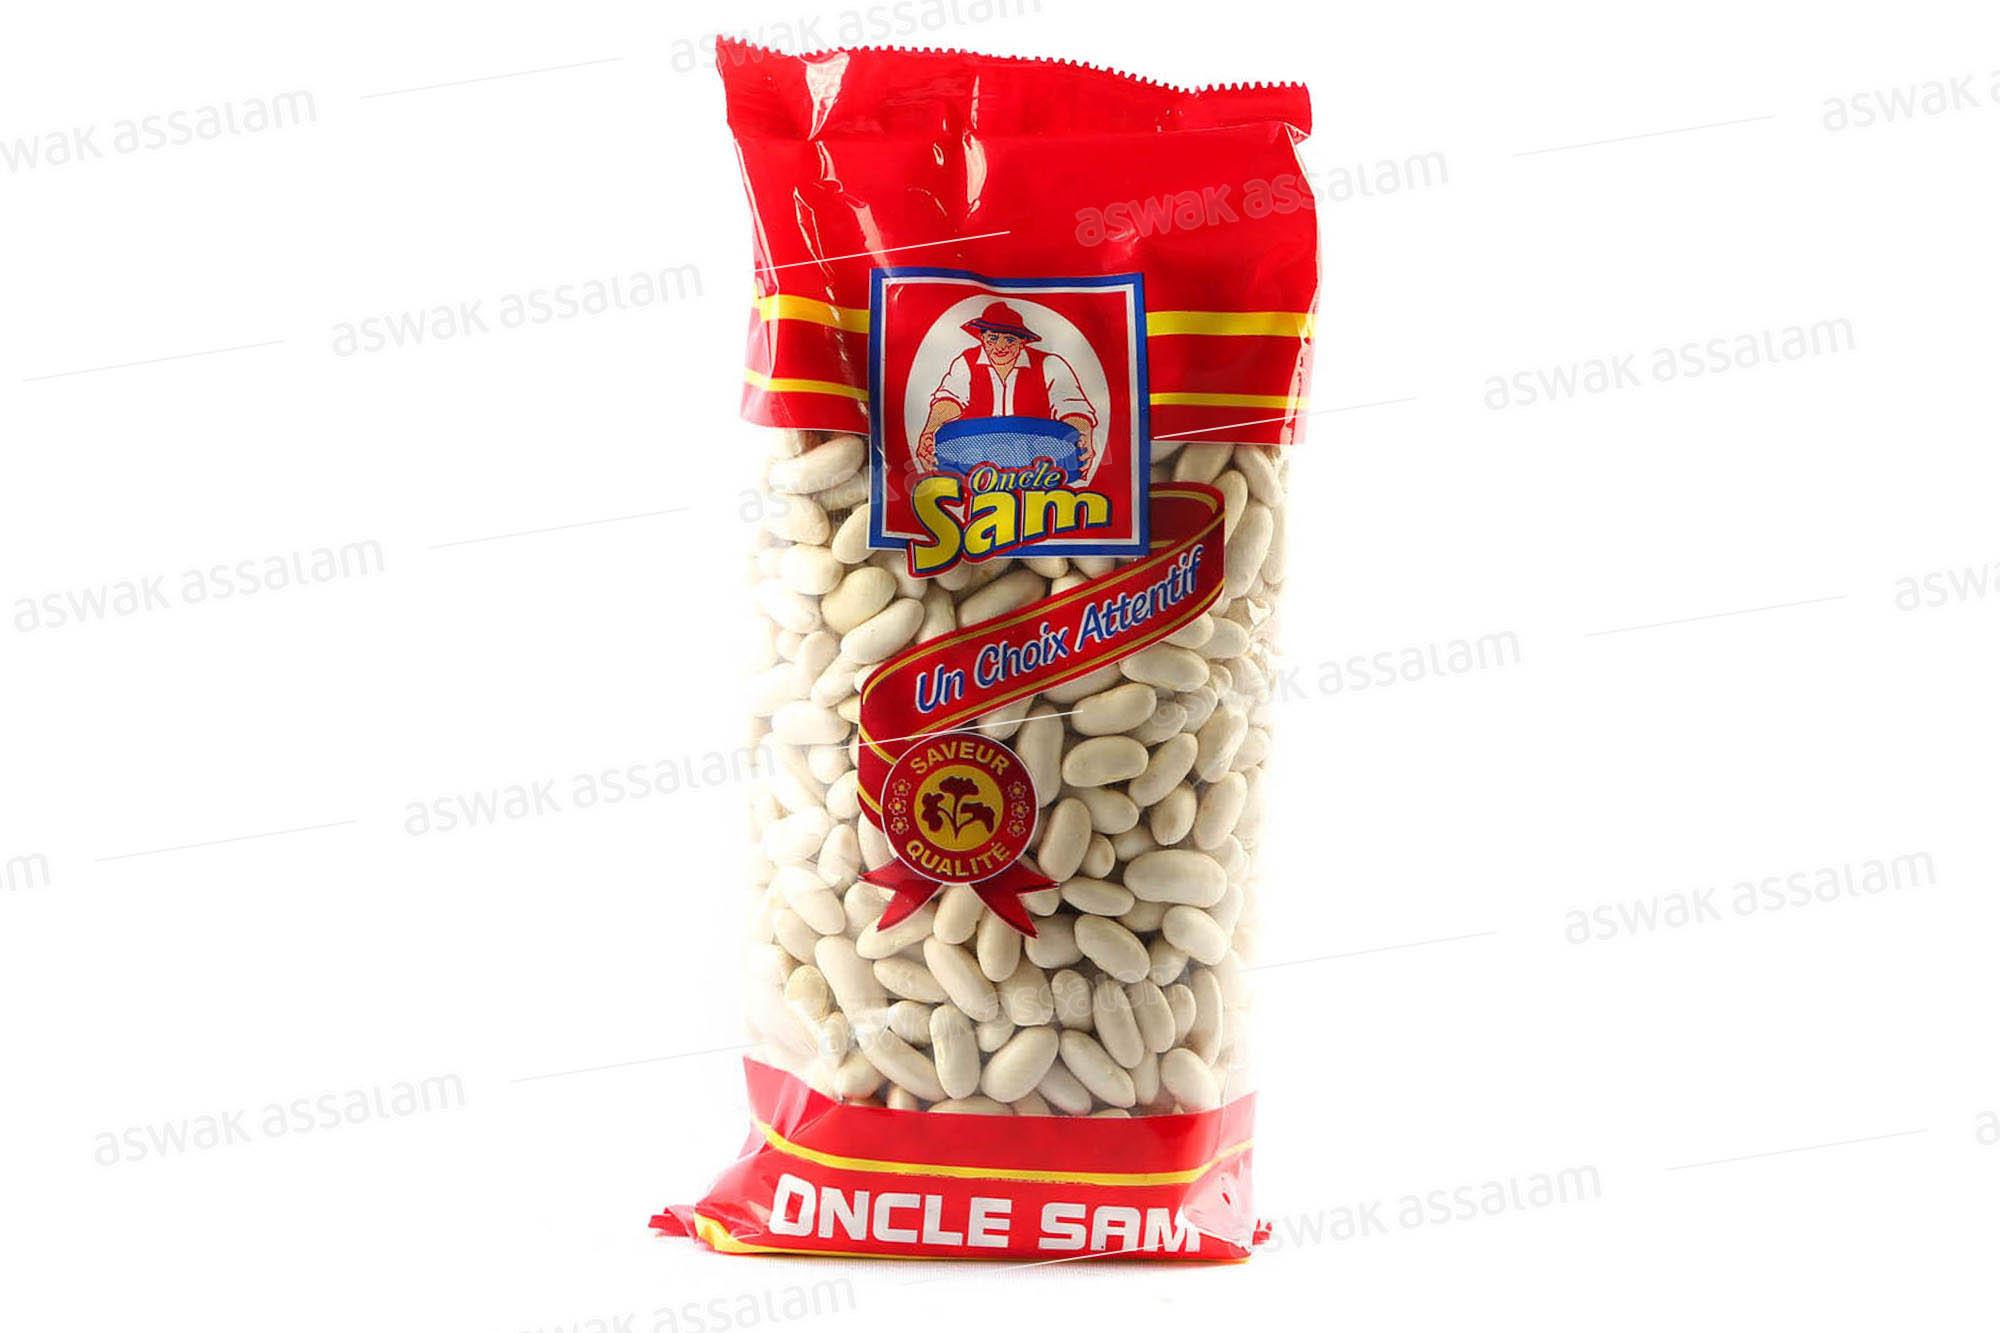 HARICOTS 500G ONCLE SAM